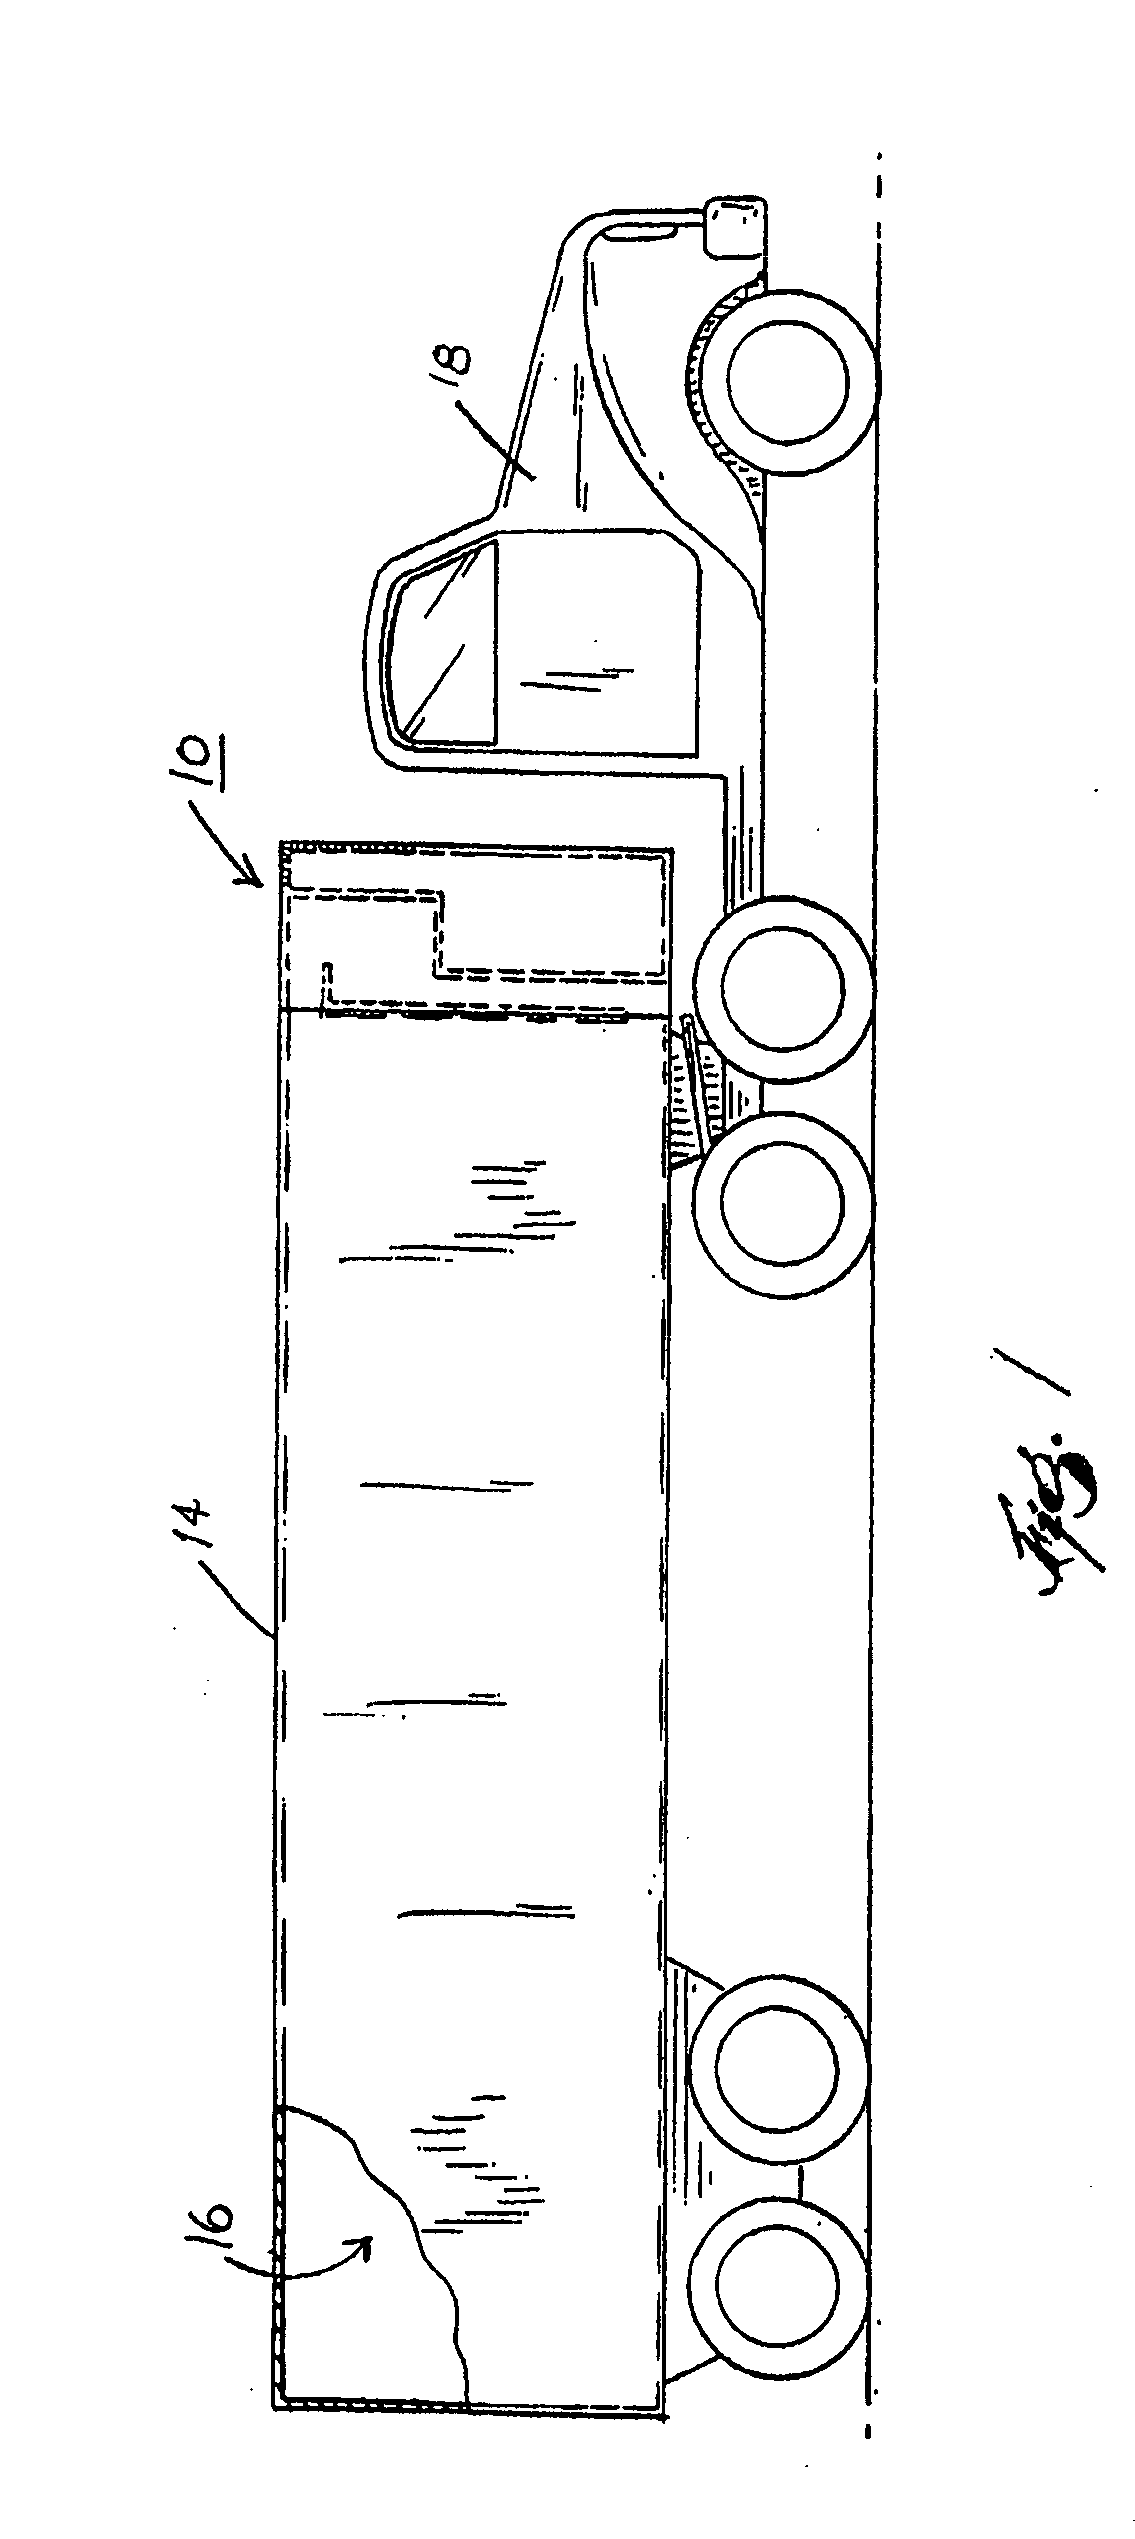 Temperature control apparatus and method of operating the same